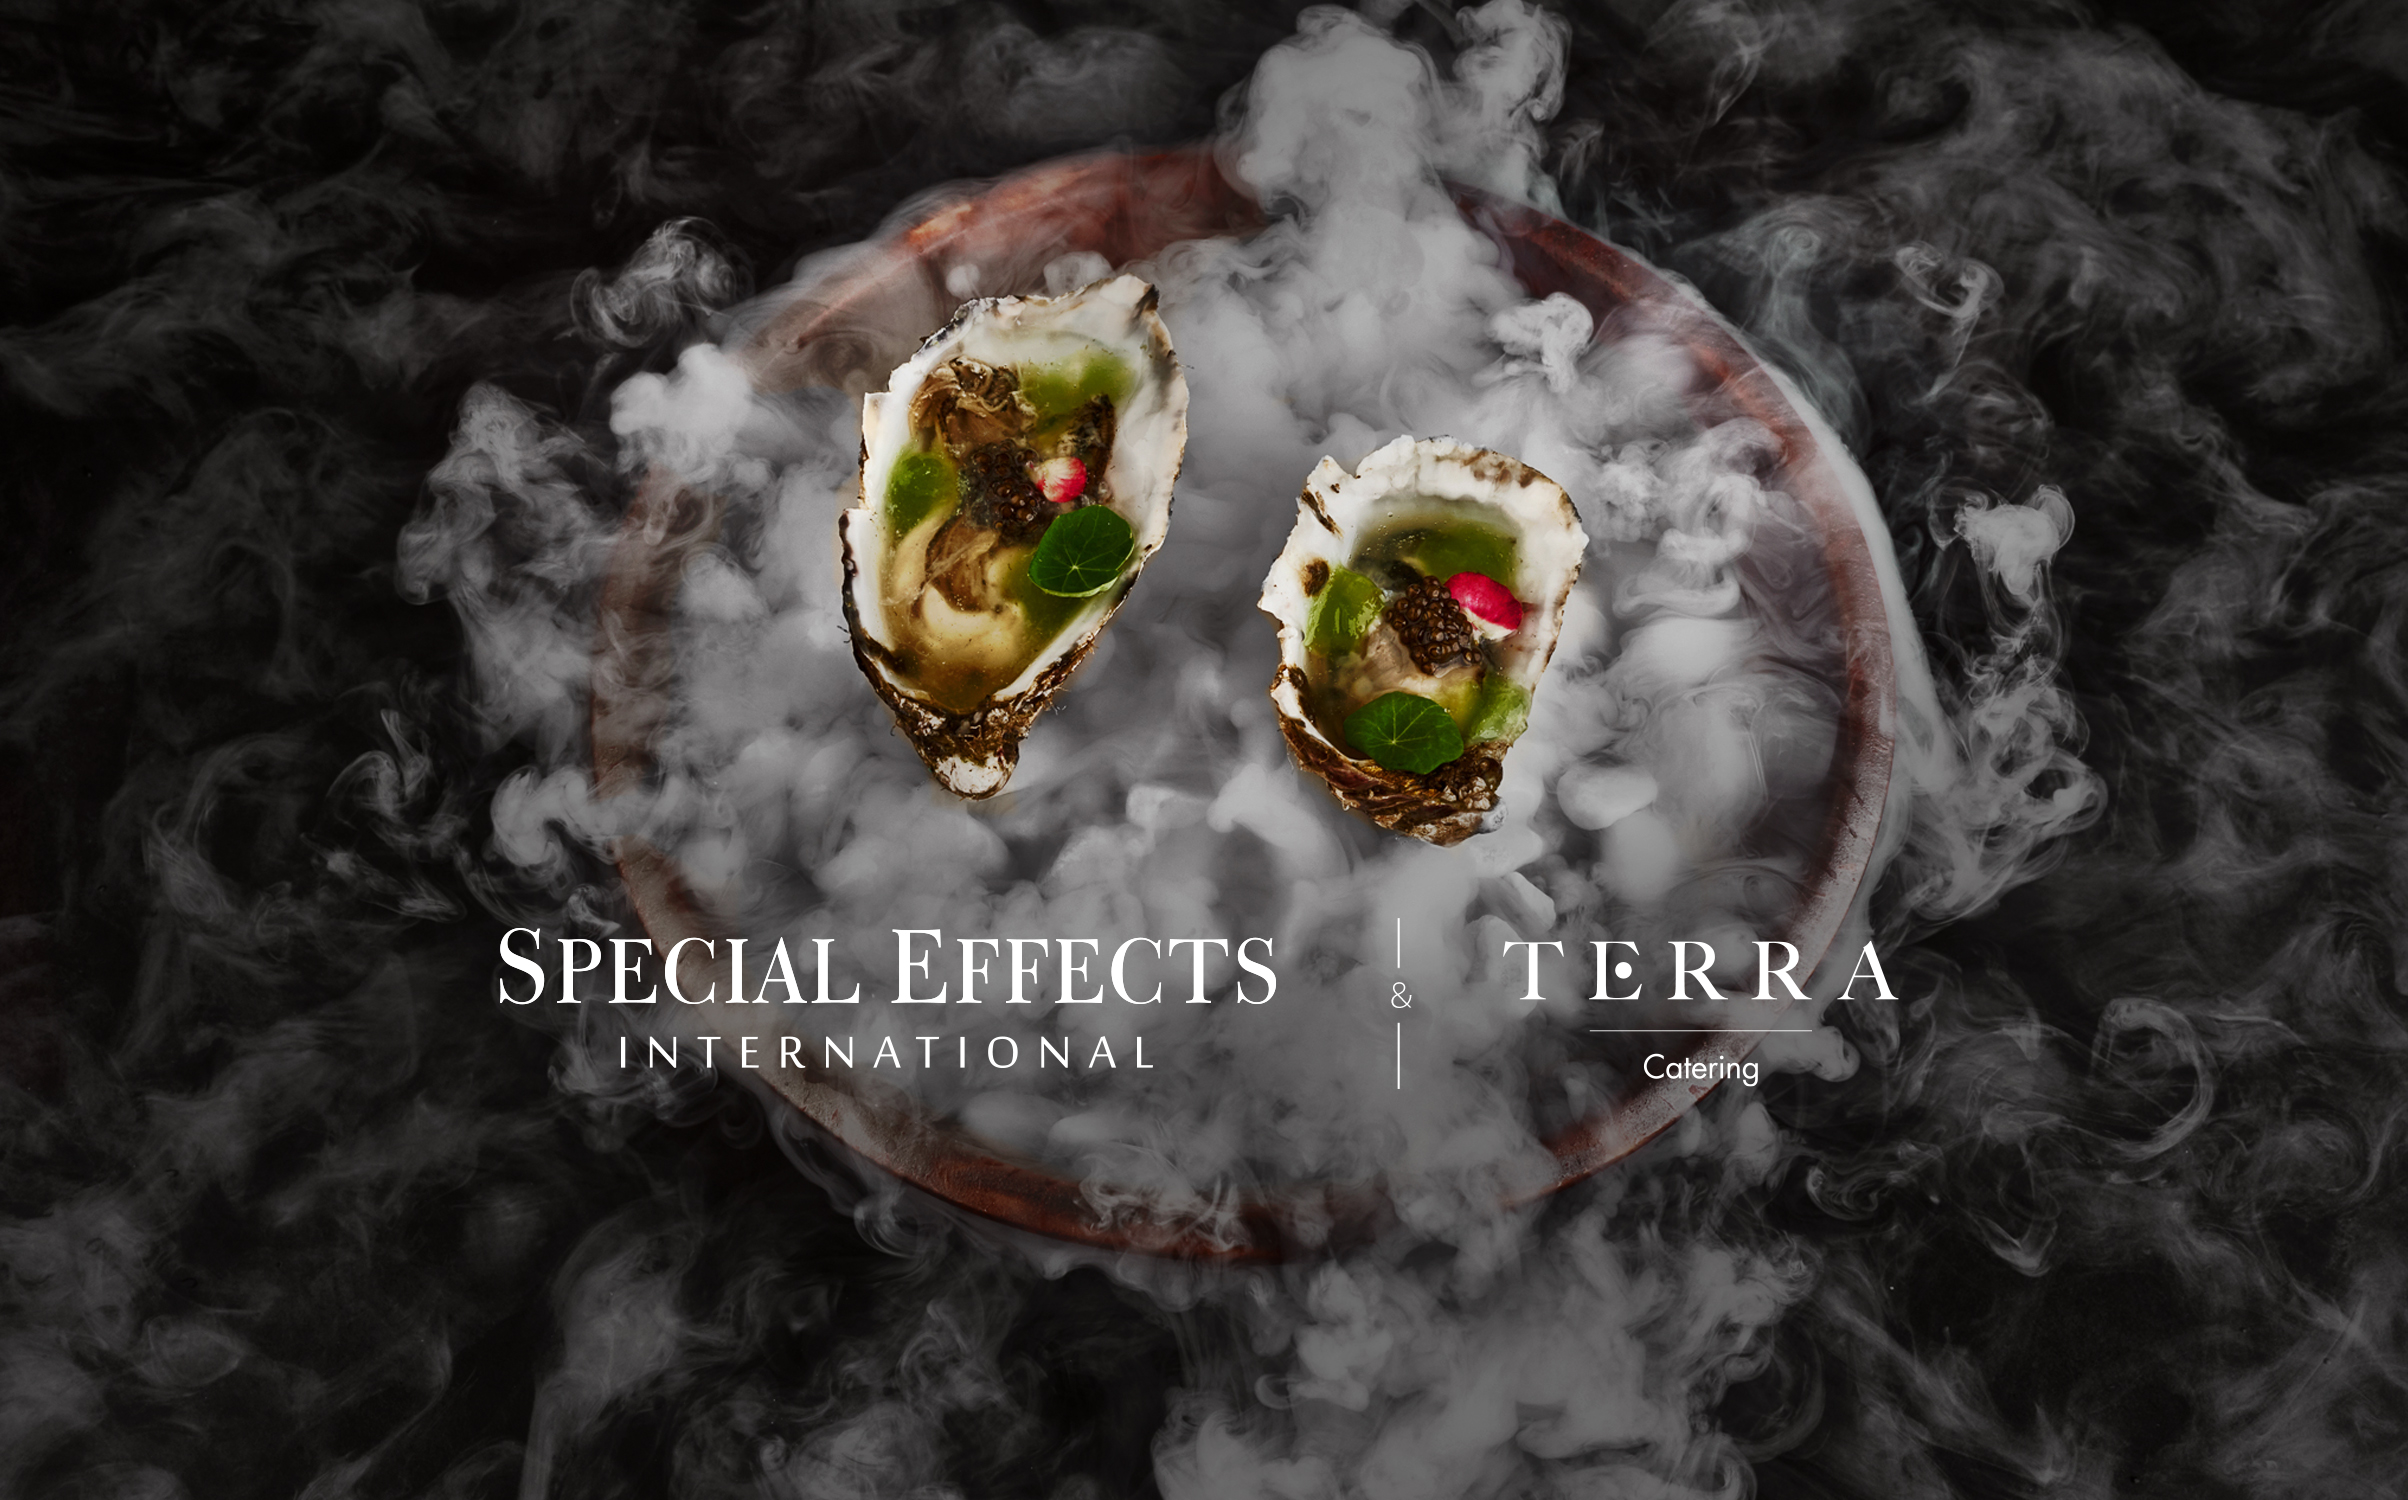 Special Effects acquires premium catering company